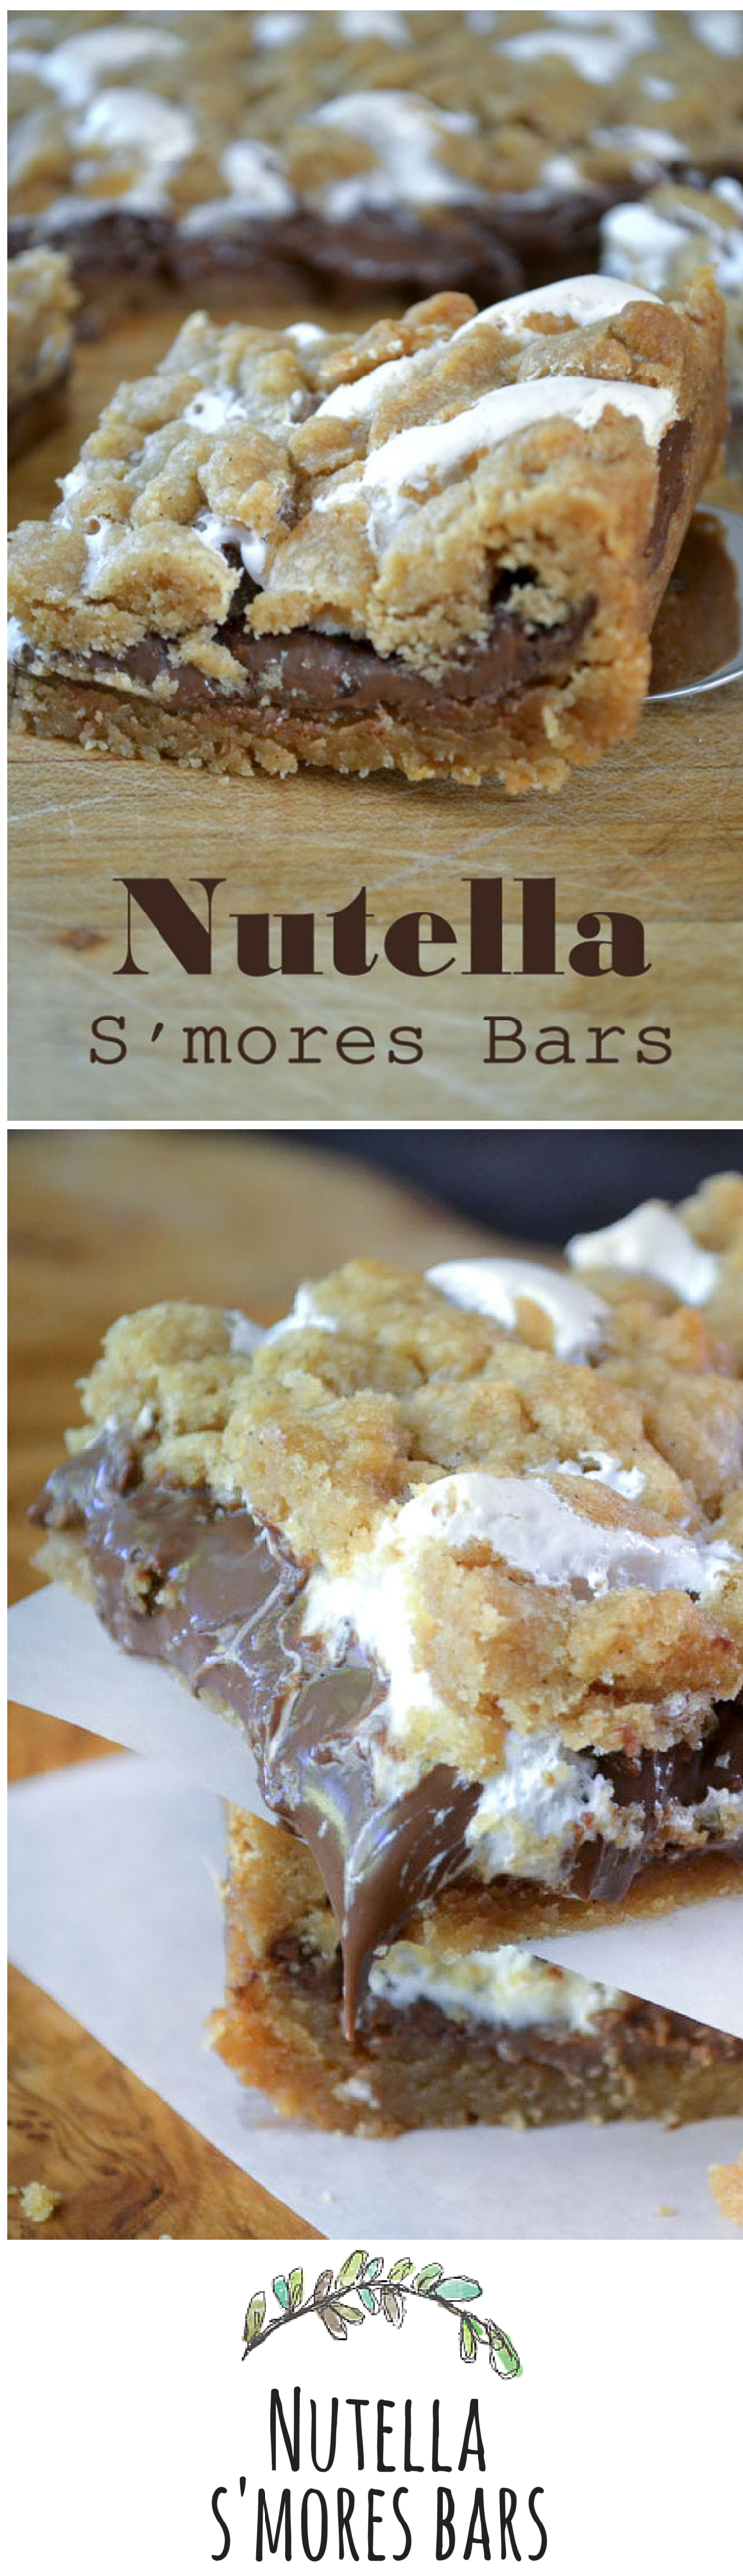 Skip the campfire and make these bars instead! What a delicious and easy dessert bar recipe with Nutella!